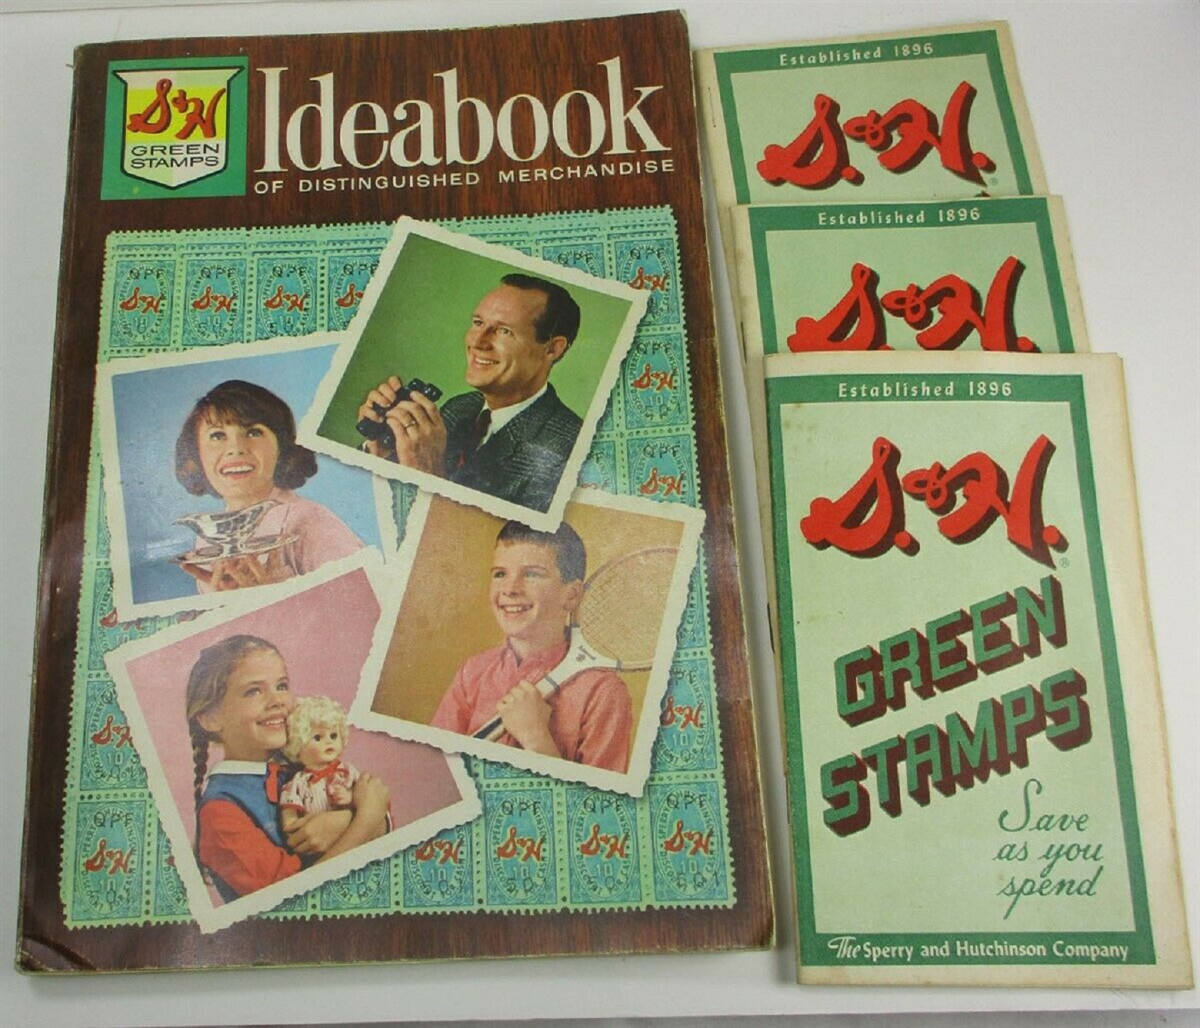 S&H 1965 Ideabook offered by eBay seller kdconway for $16.99.